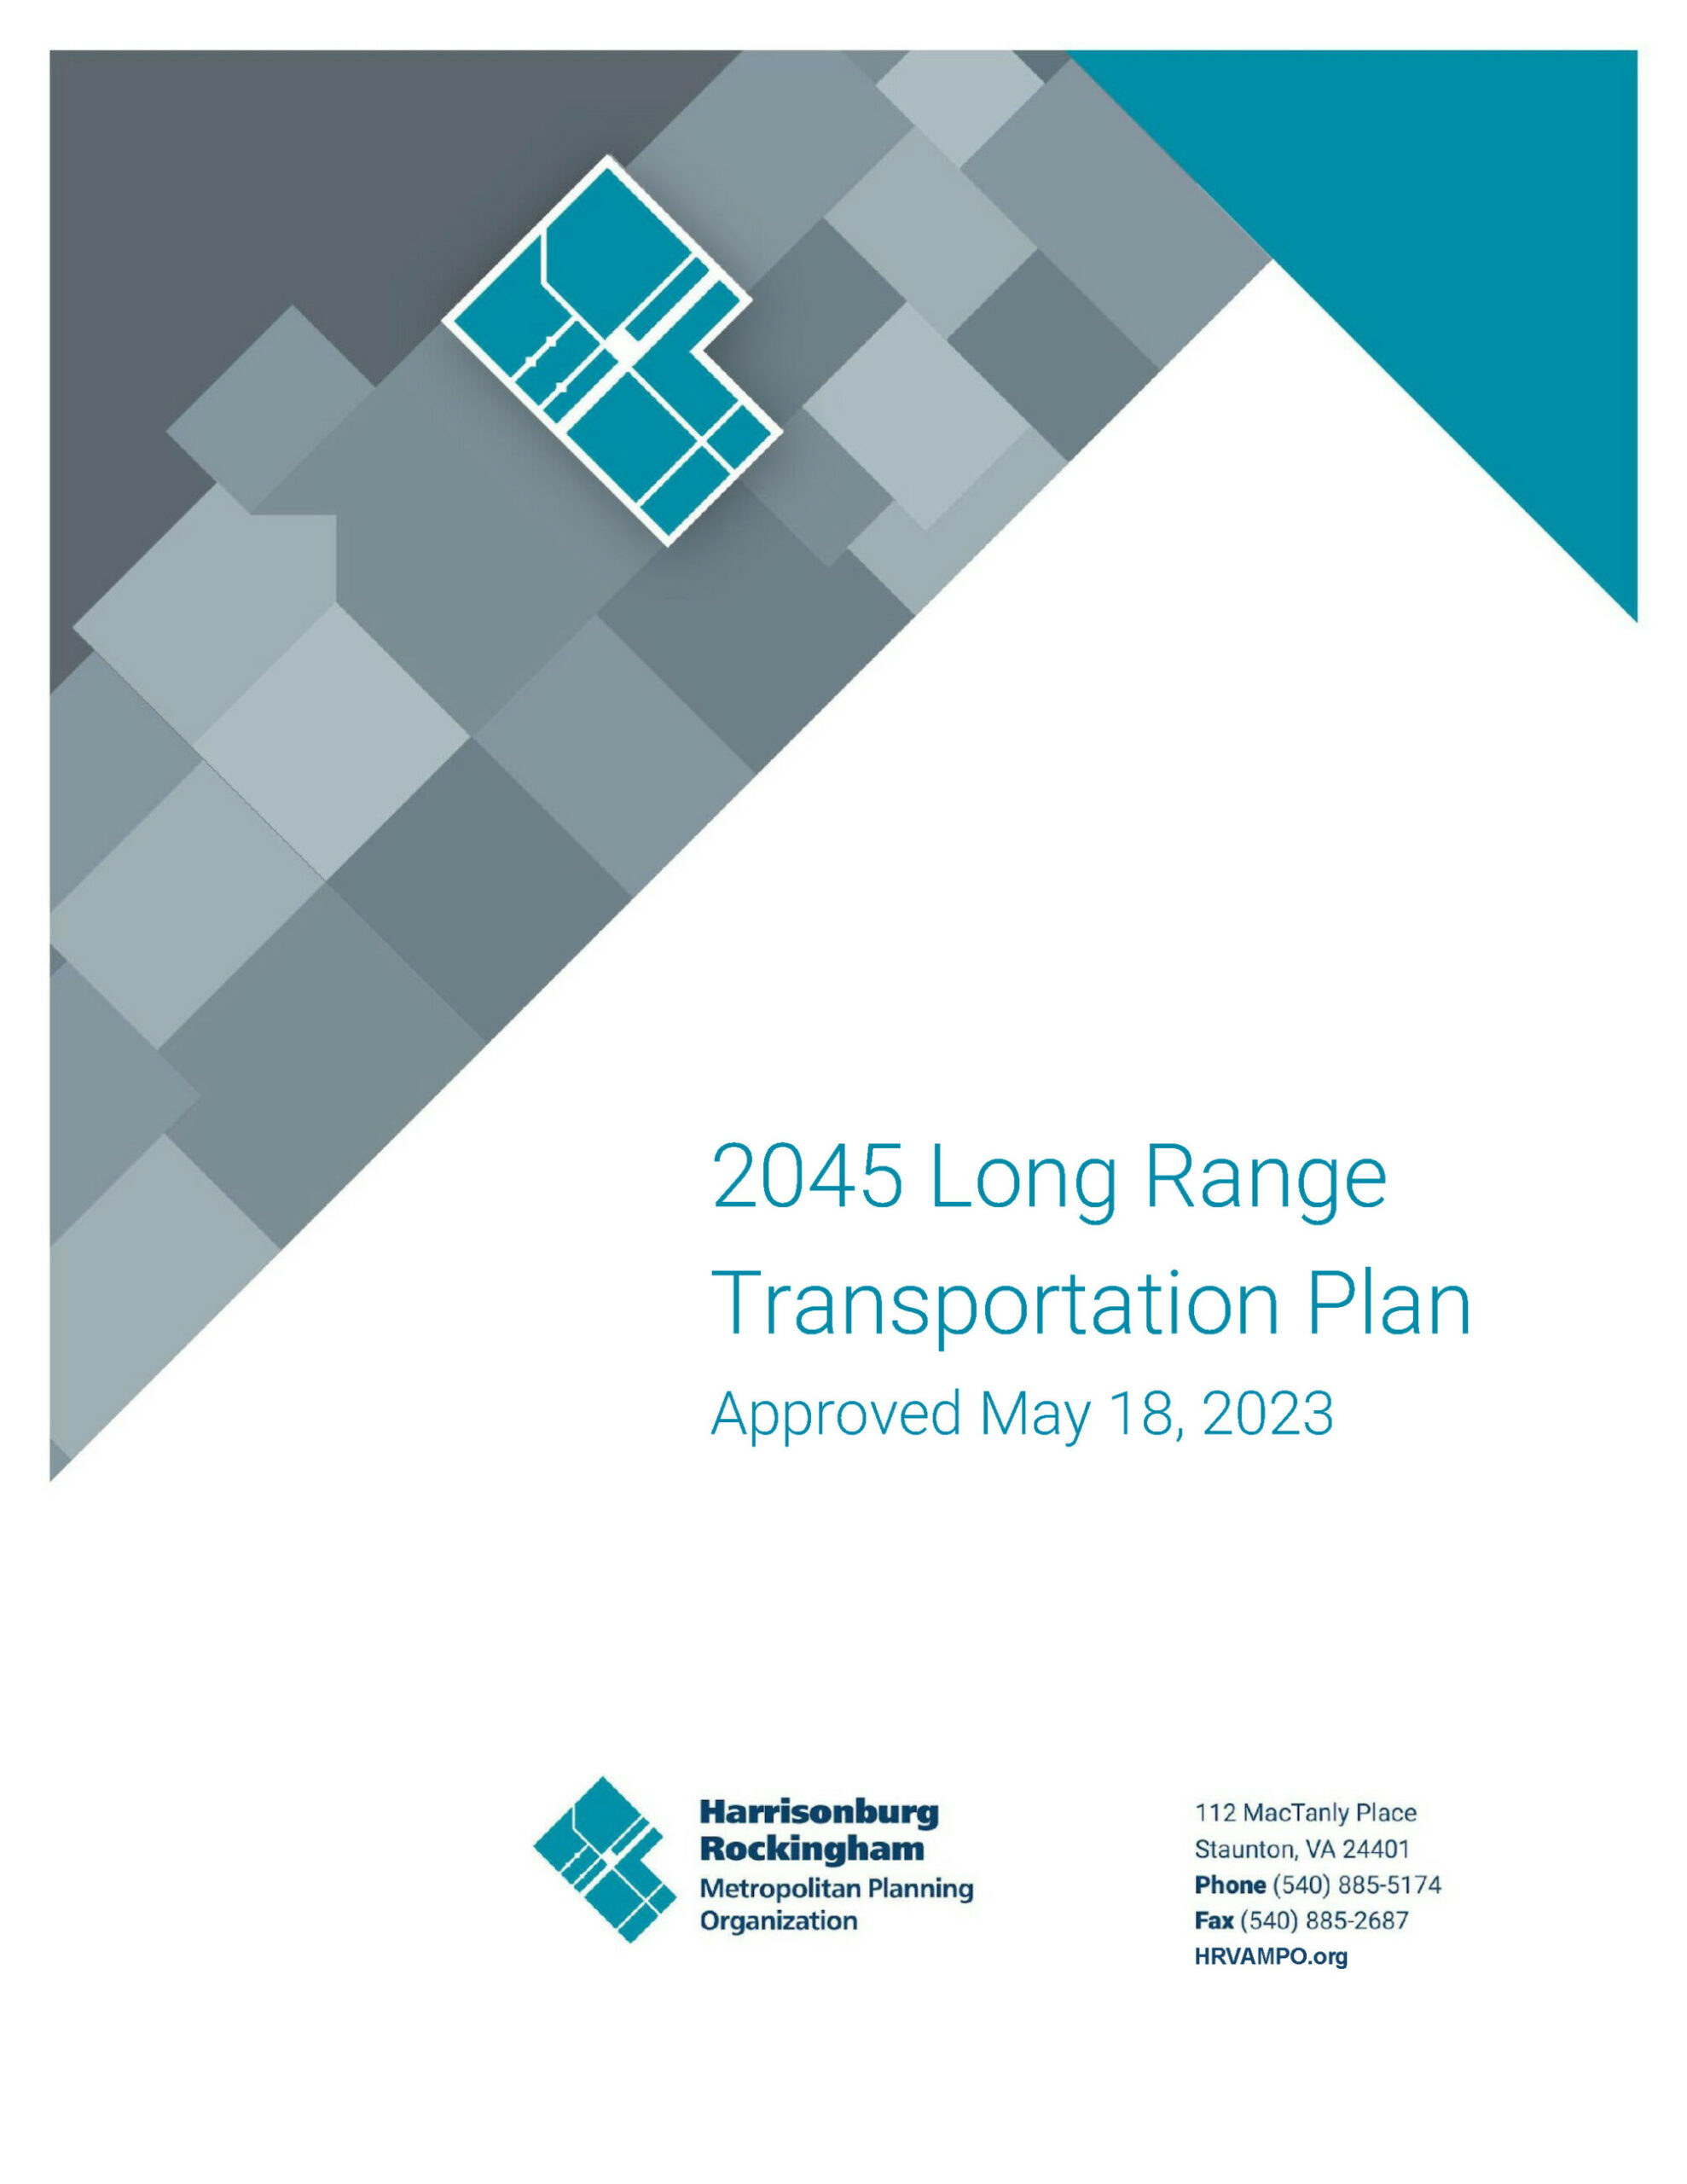 Front page of the Harrisonburg Rockingham Long Range Transportation Plan document with blue and grey block graphics across the top.